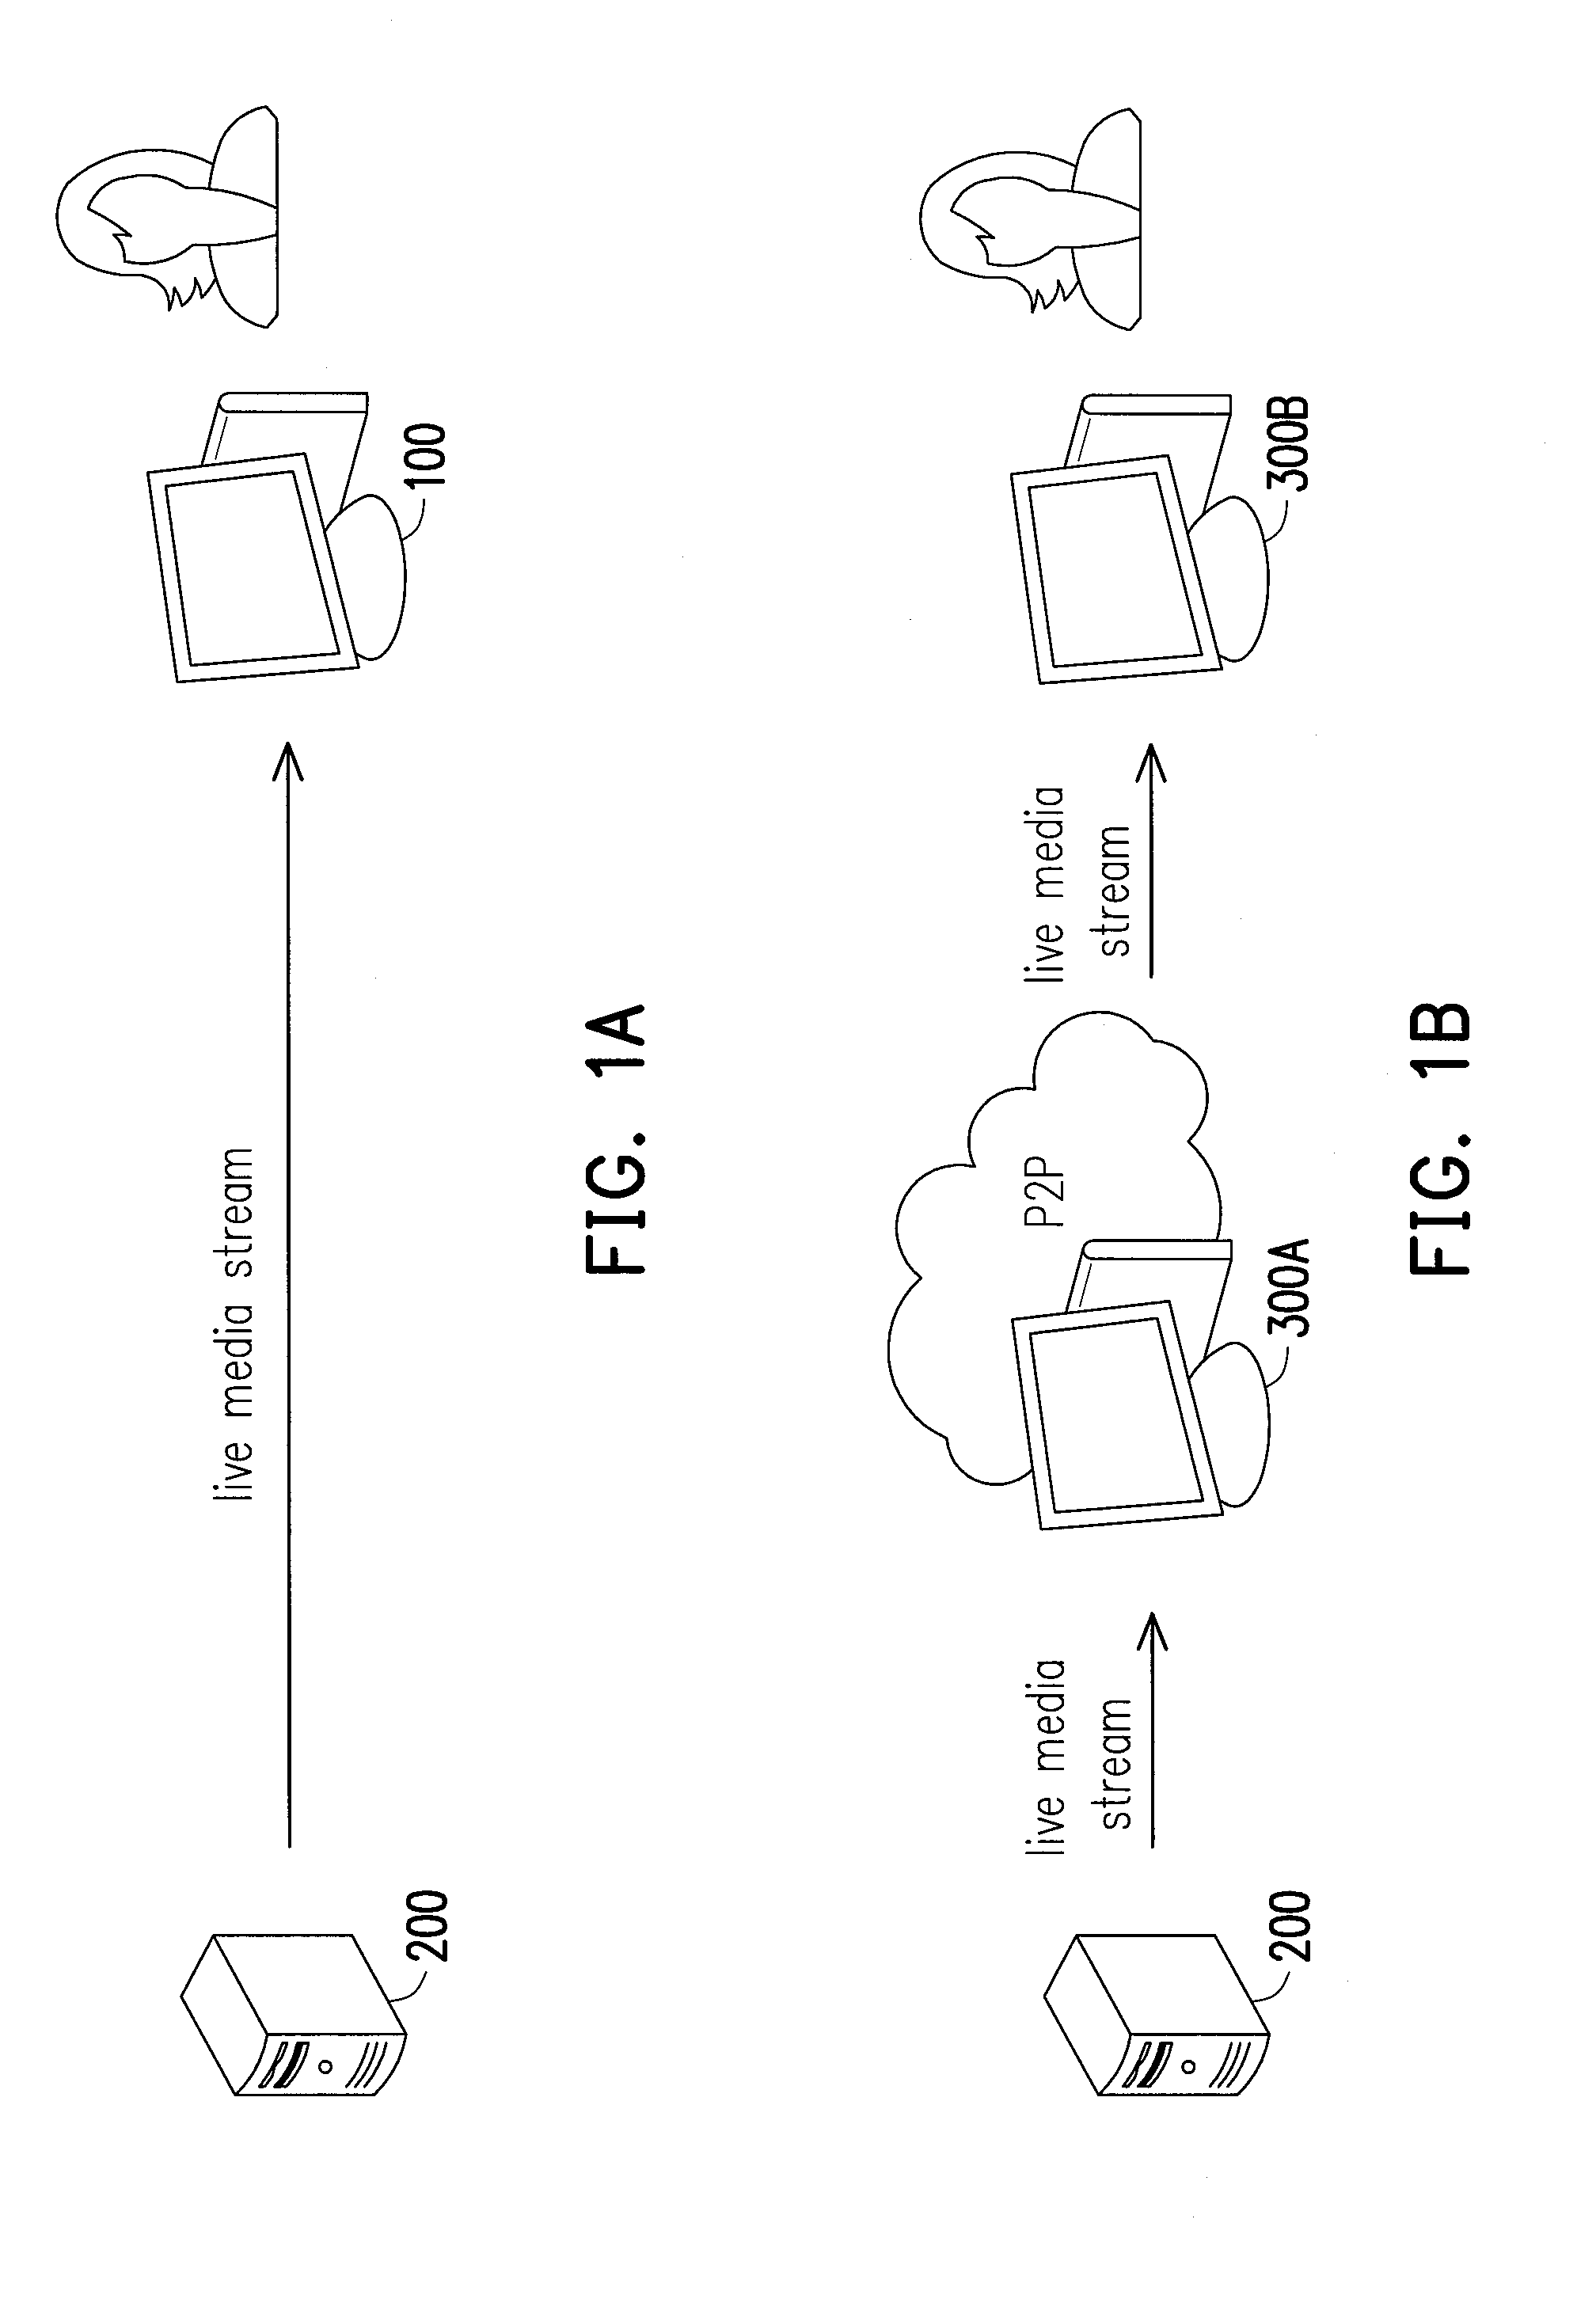 Media streaming method and device using the same